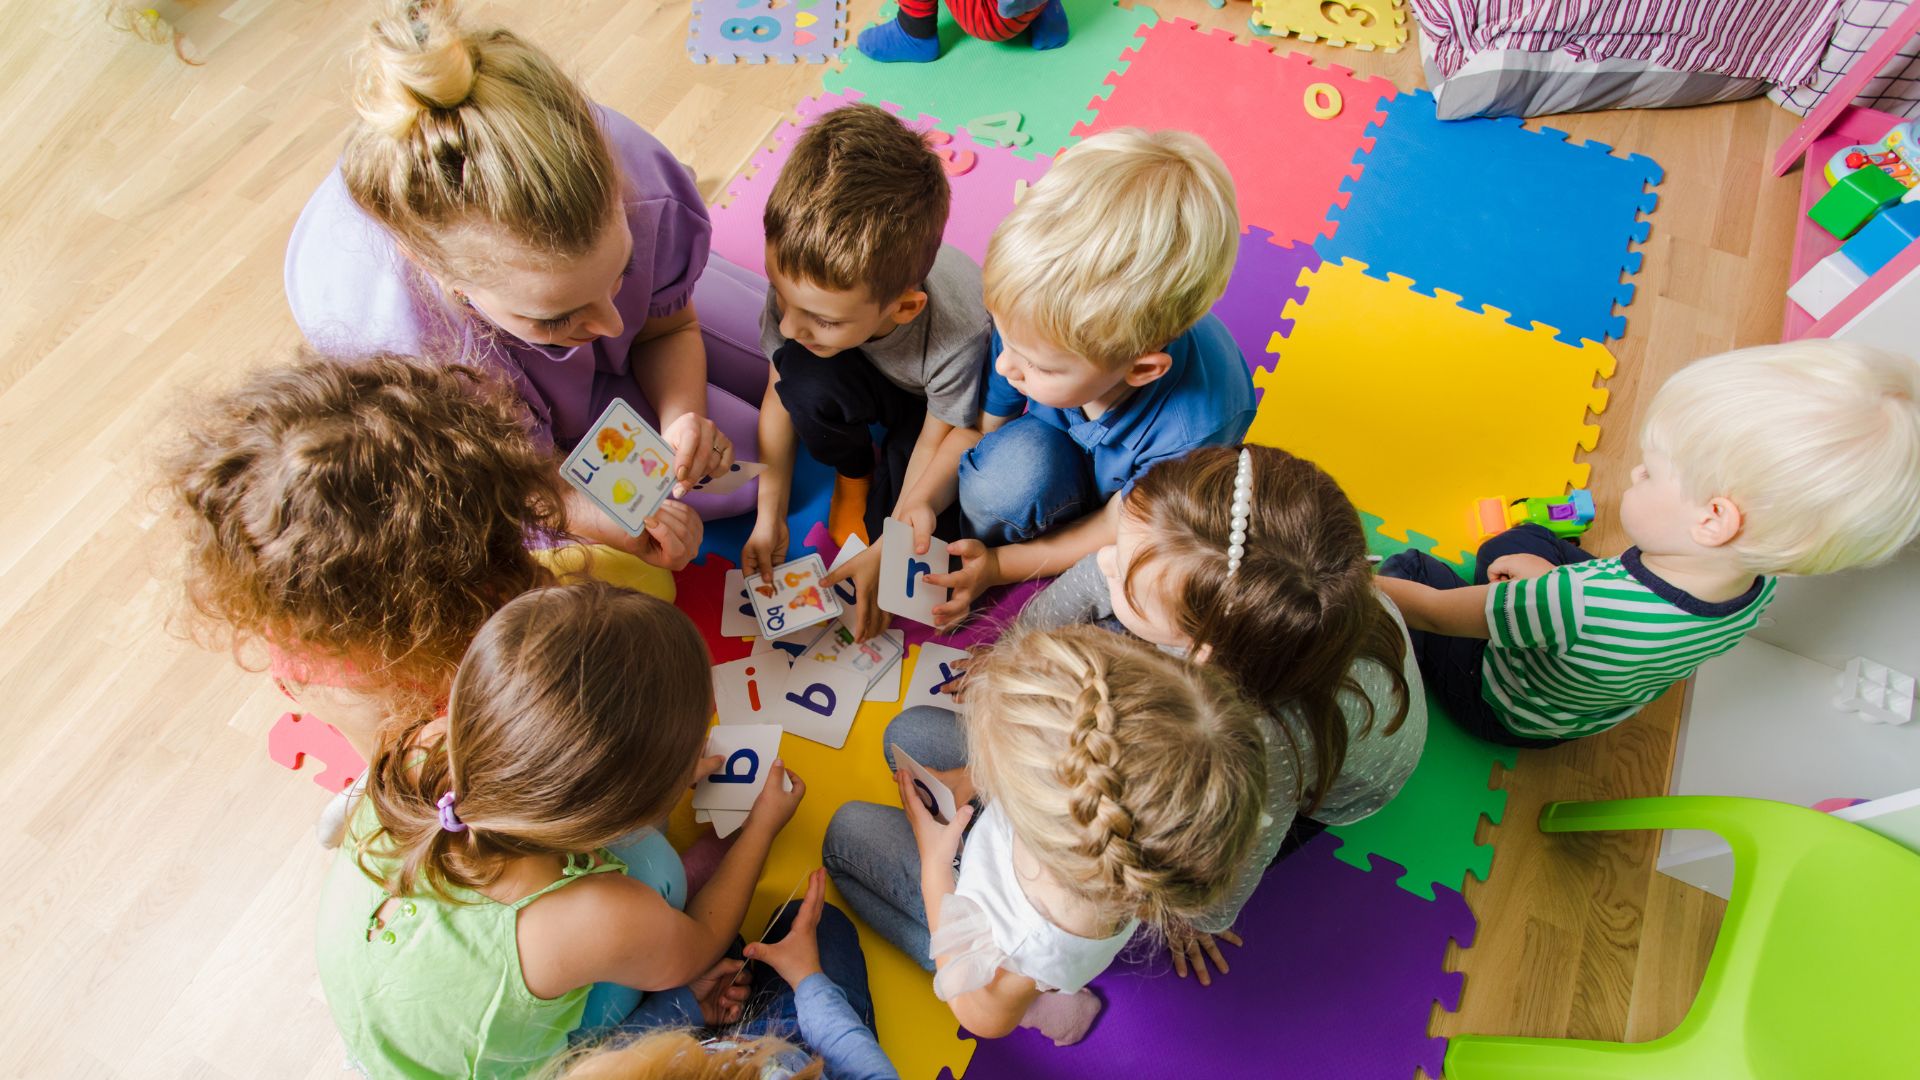 Daycare for Infants: When to Start and What to Look for